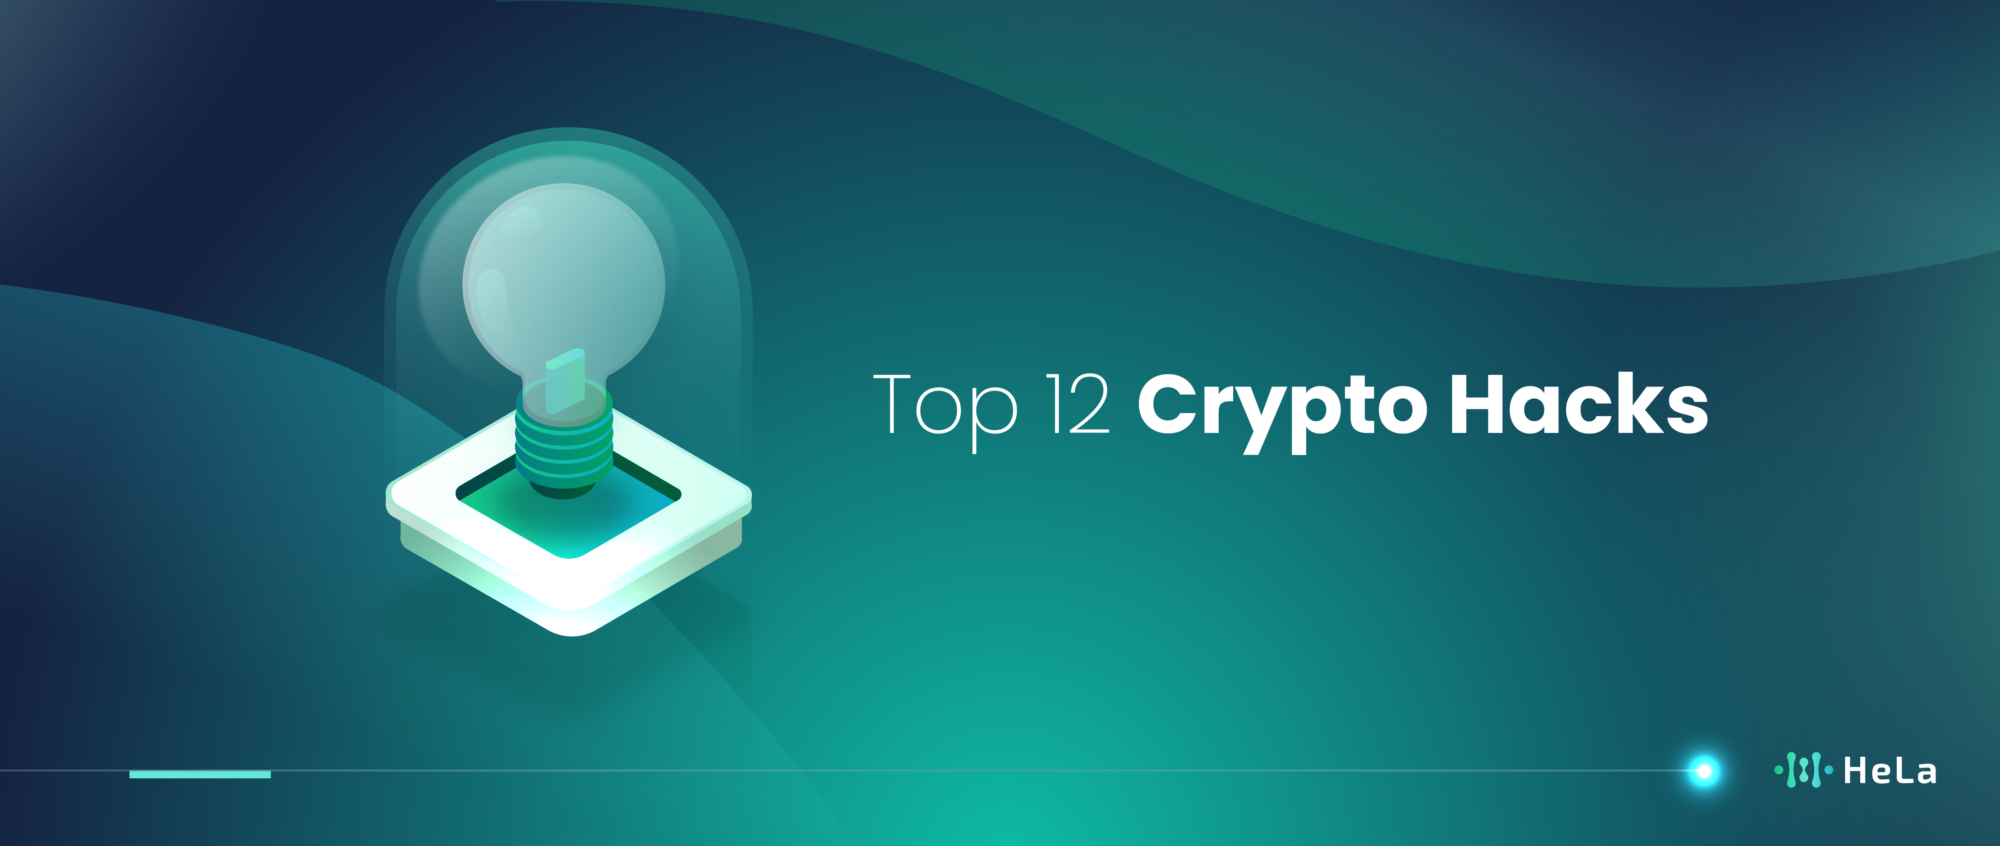 Top 12 Crypto Hacks that You Should Know